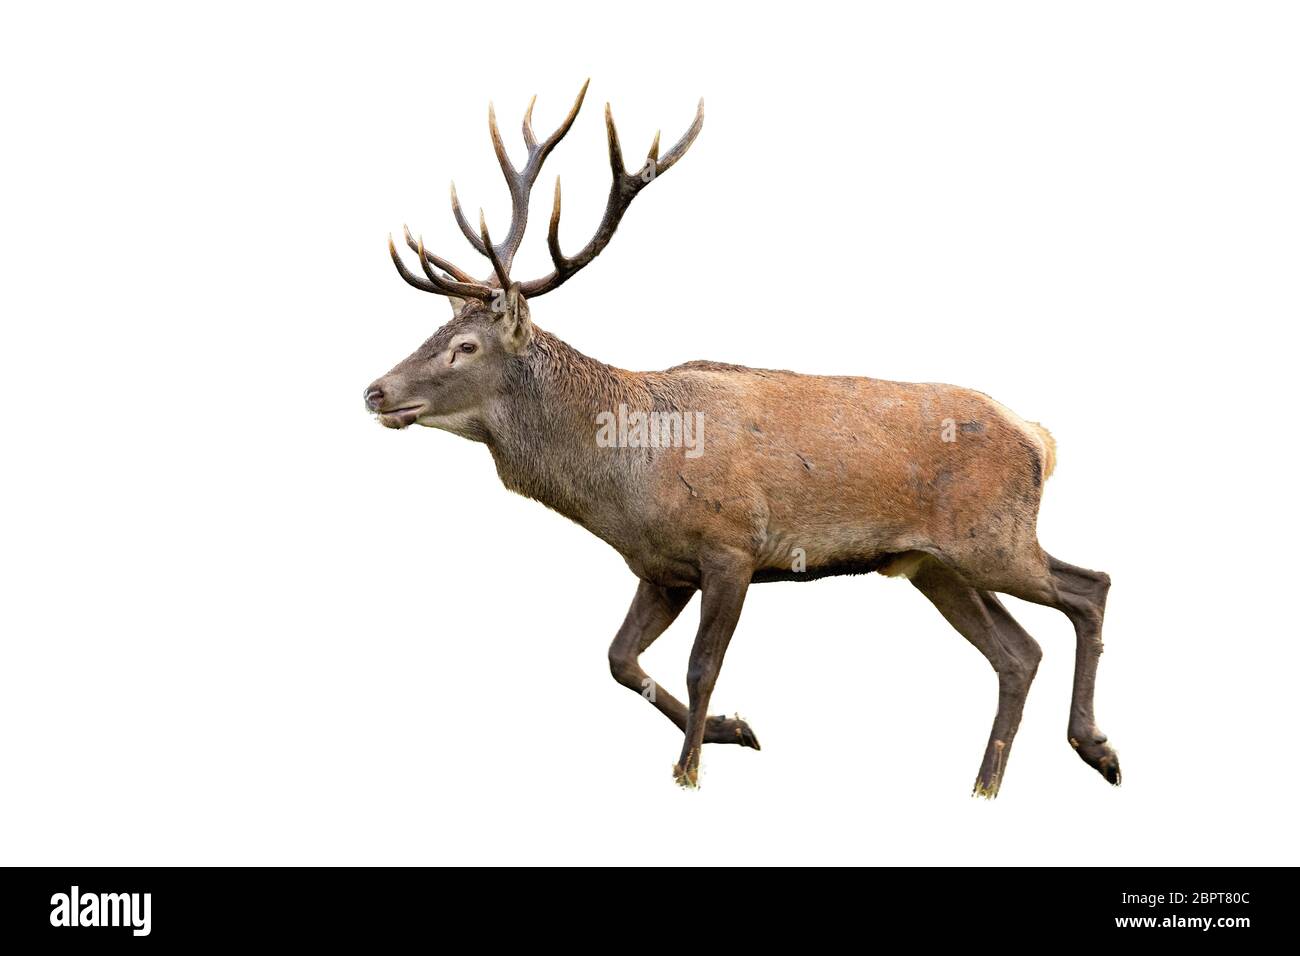 Isolated walking red deer, cervus elaphus, stag with antlers. Mammal galloping on white. Stock Photo